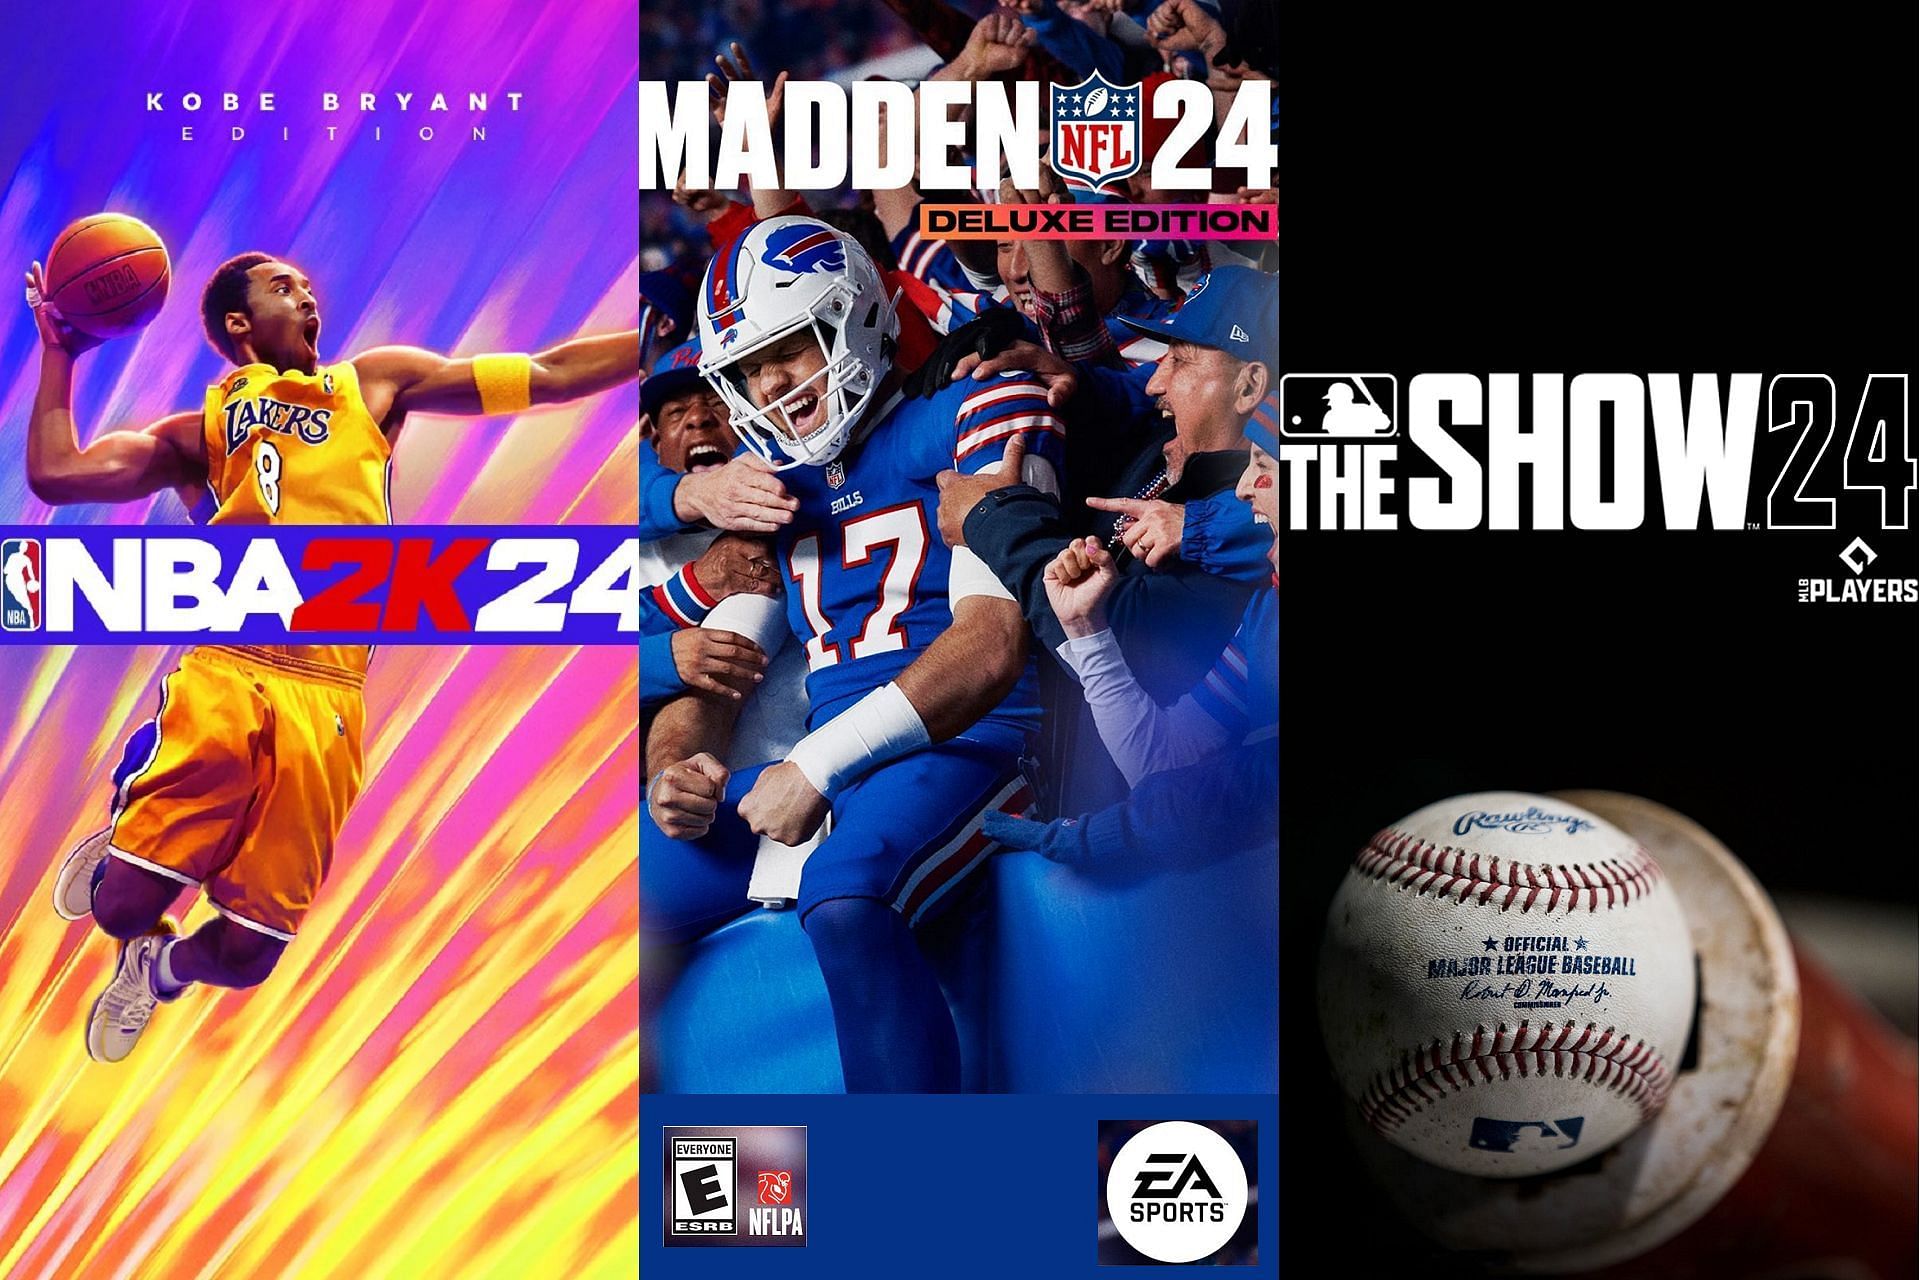 Madden 24's failure has fans crowning NBA 2K and MLB the Show as far  superior games - “They blow Madden out of the water”